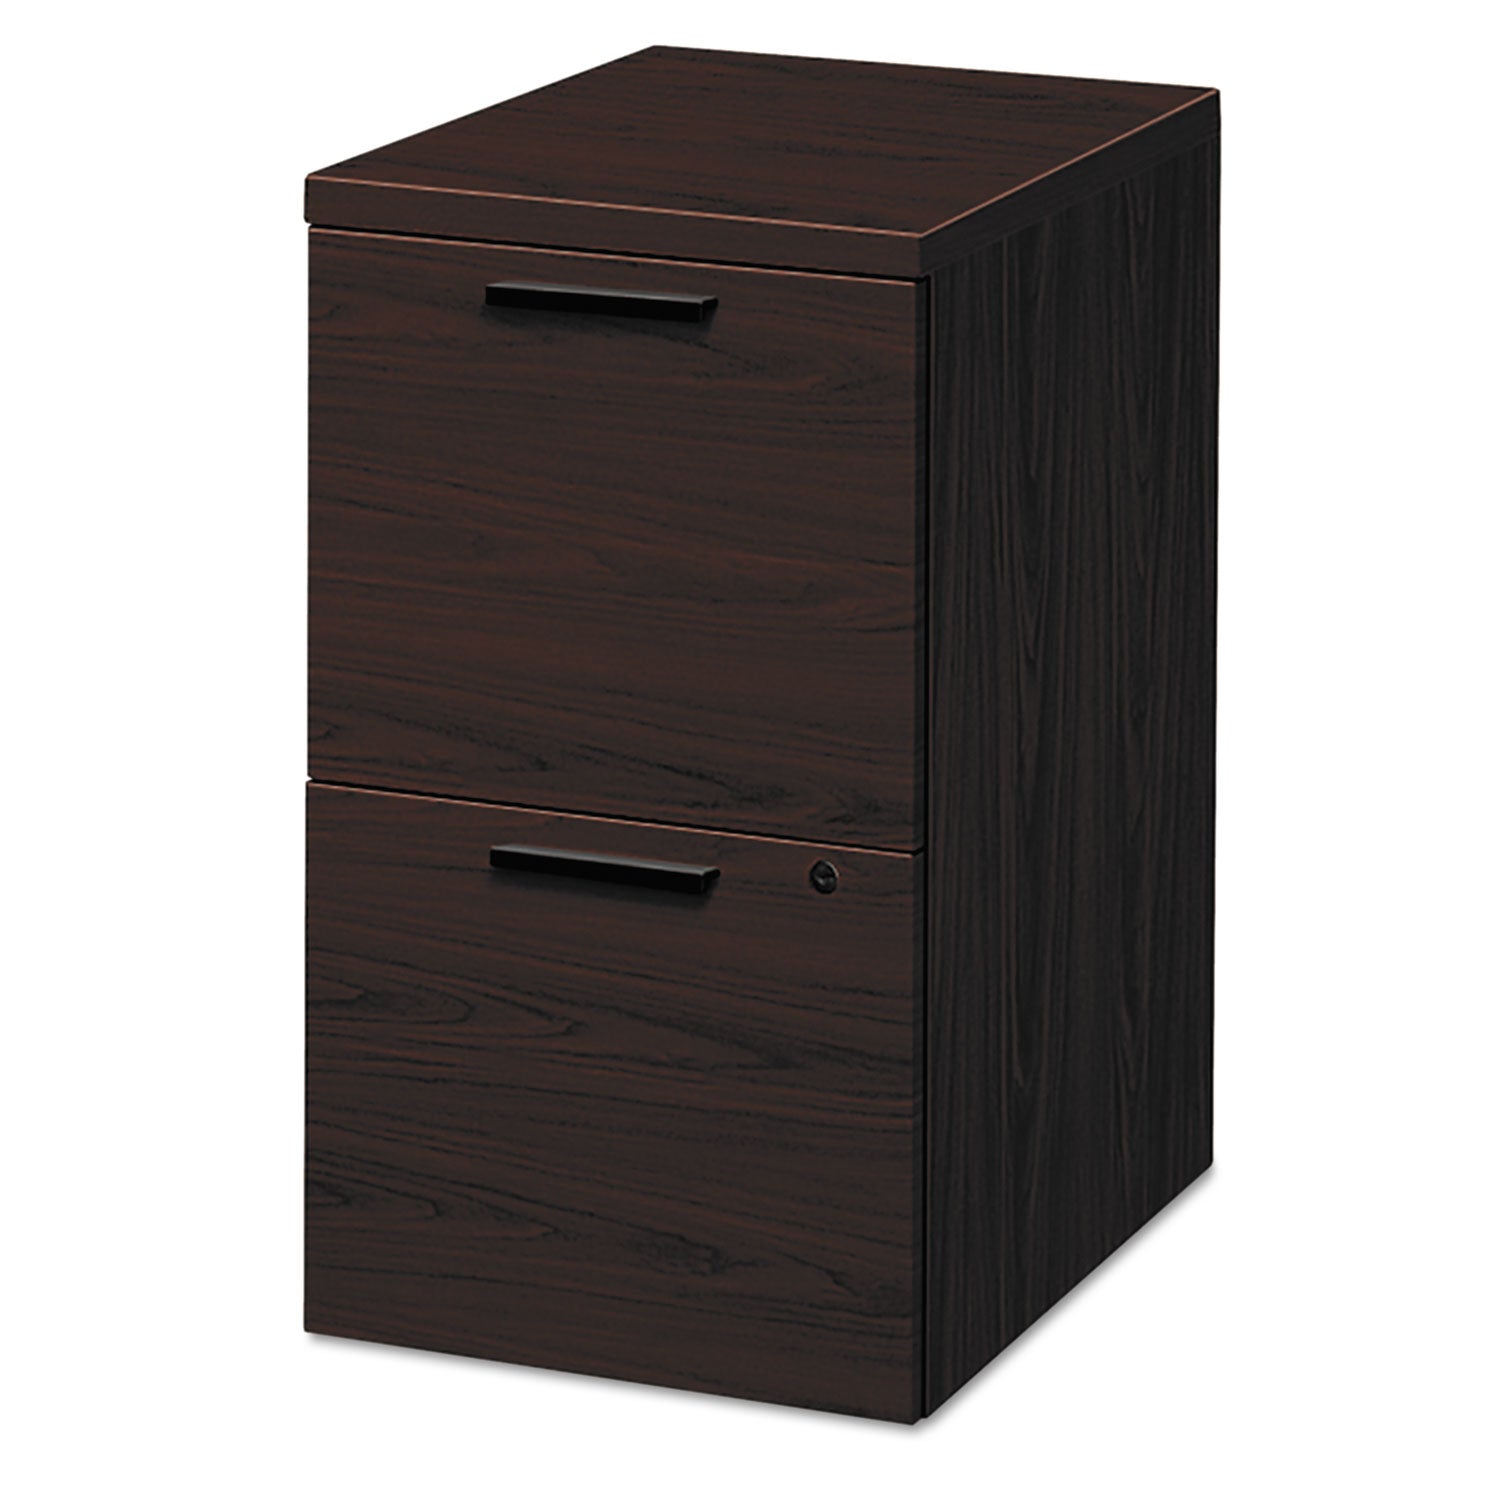 10500 Series Mobile Pedestal File, Left or Right, 2 Legal/Letter-Size File Drawers, Mahogany, 15.75" x 22.75" x 28 - 